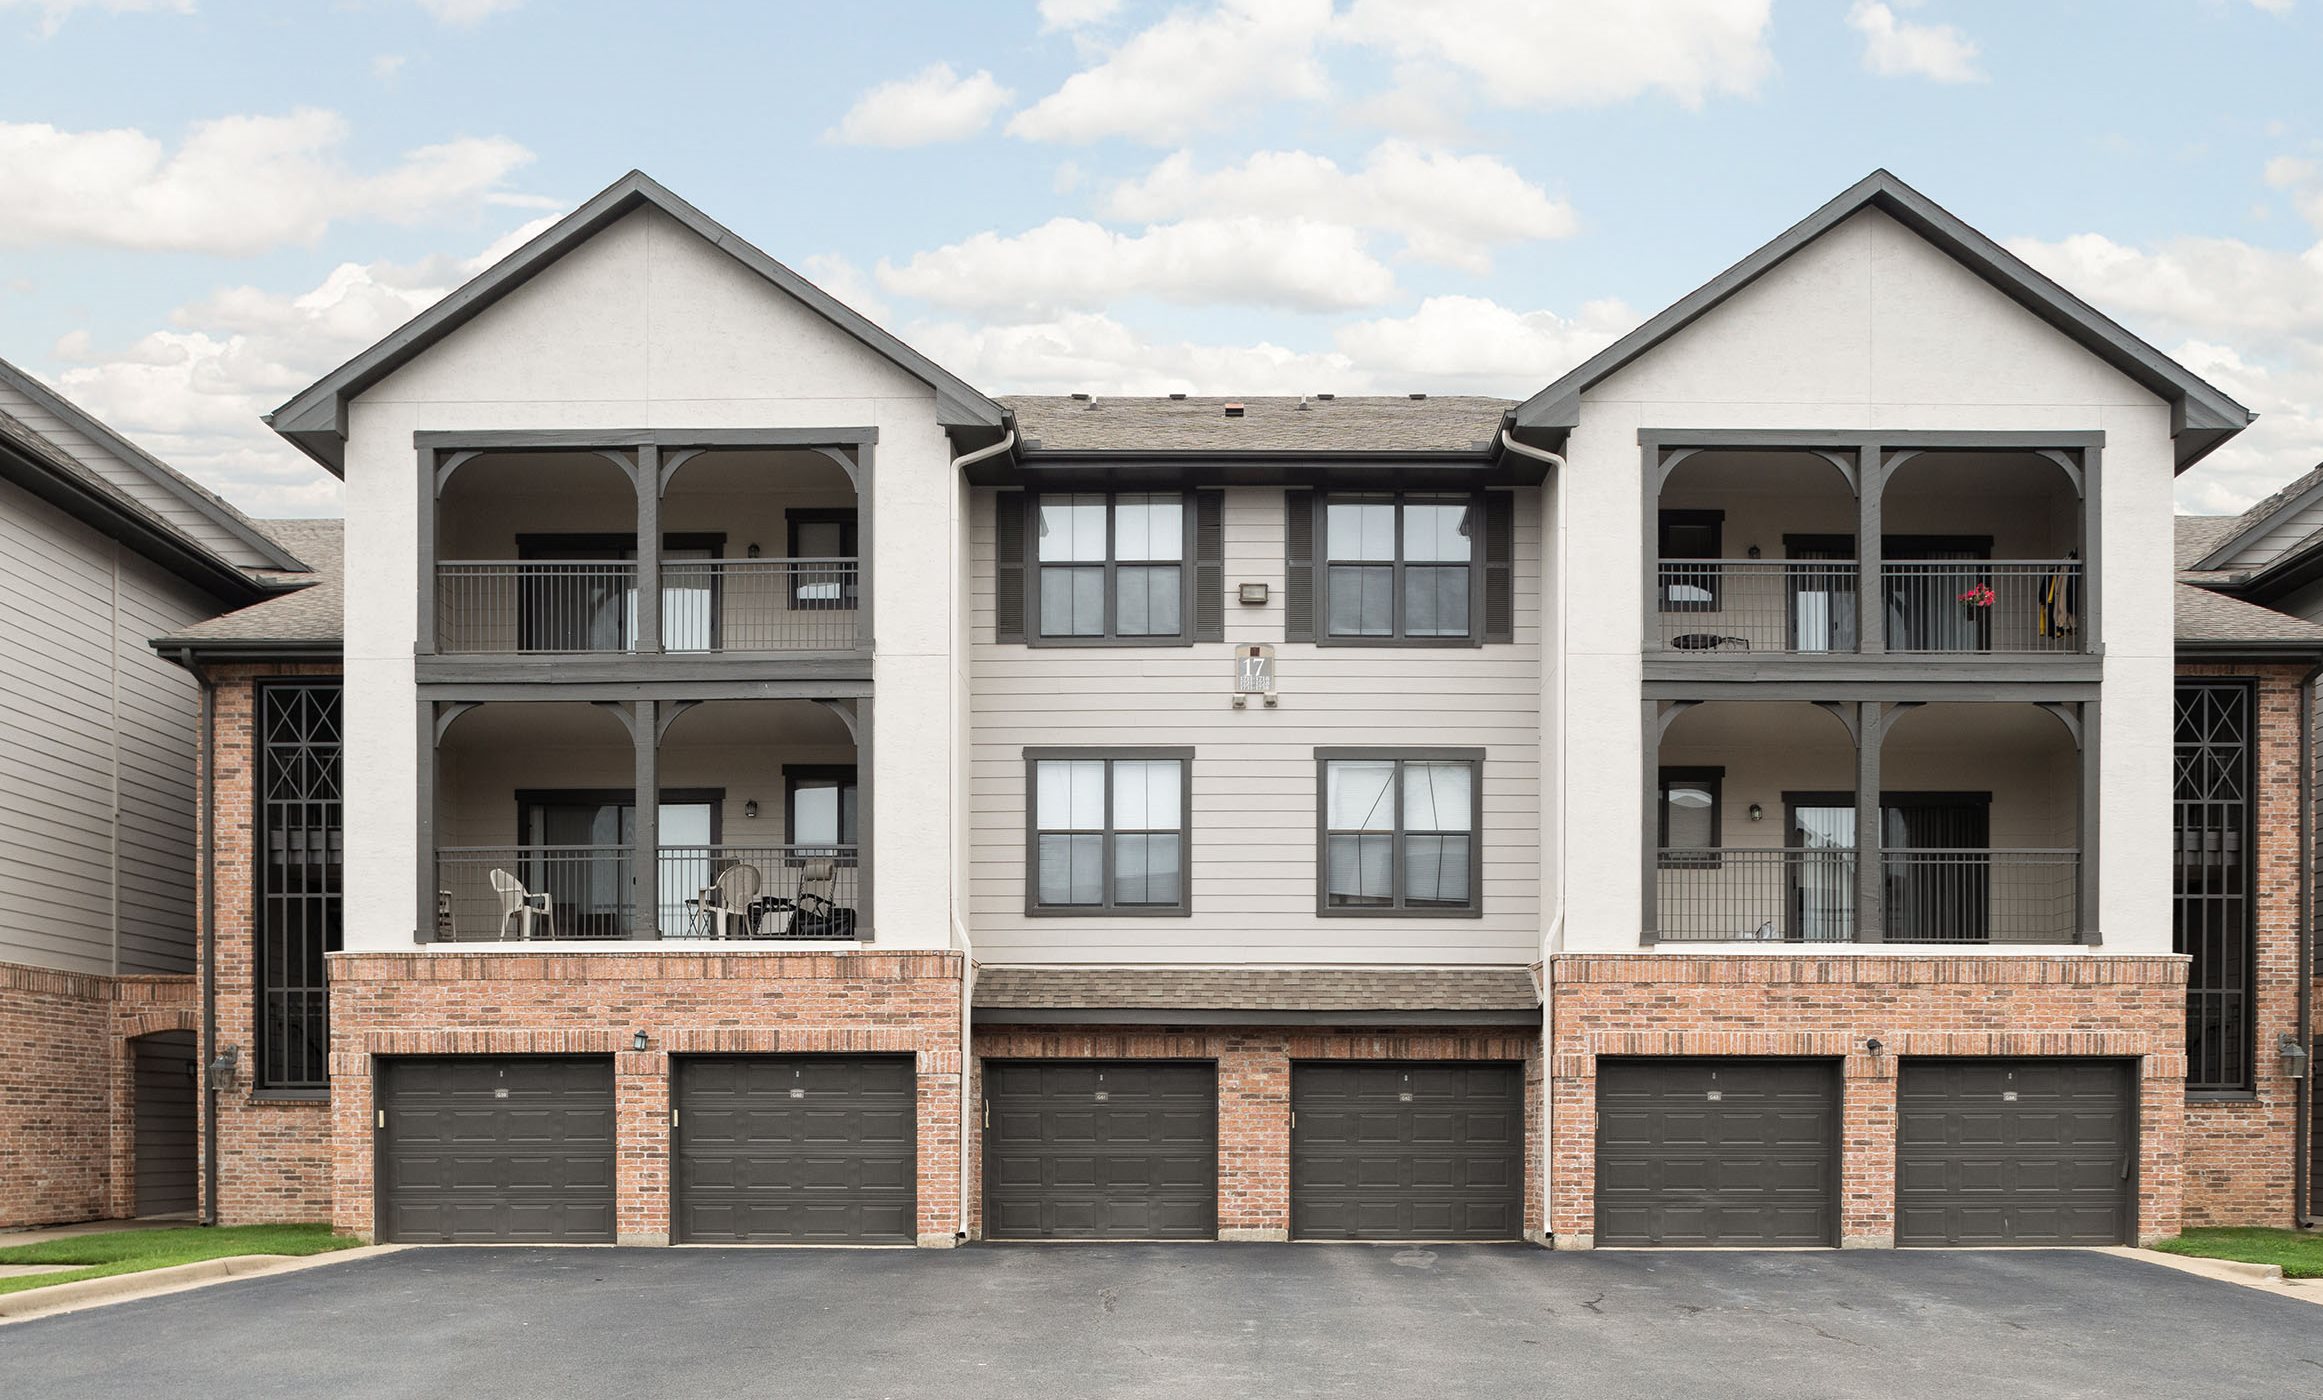 Stonebridge at the Ranch | Apartments in Little Rock, AR